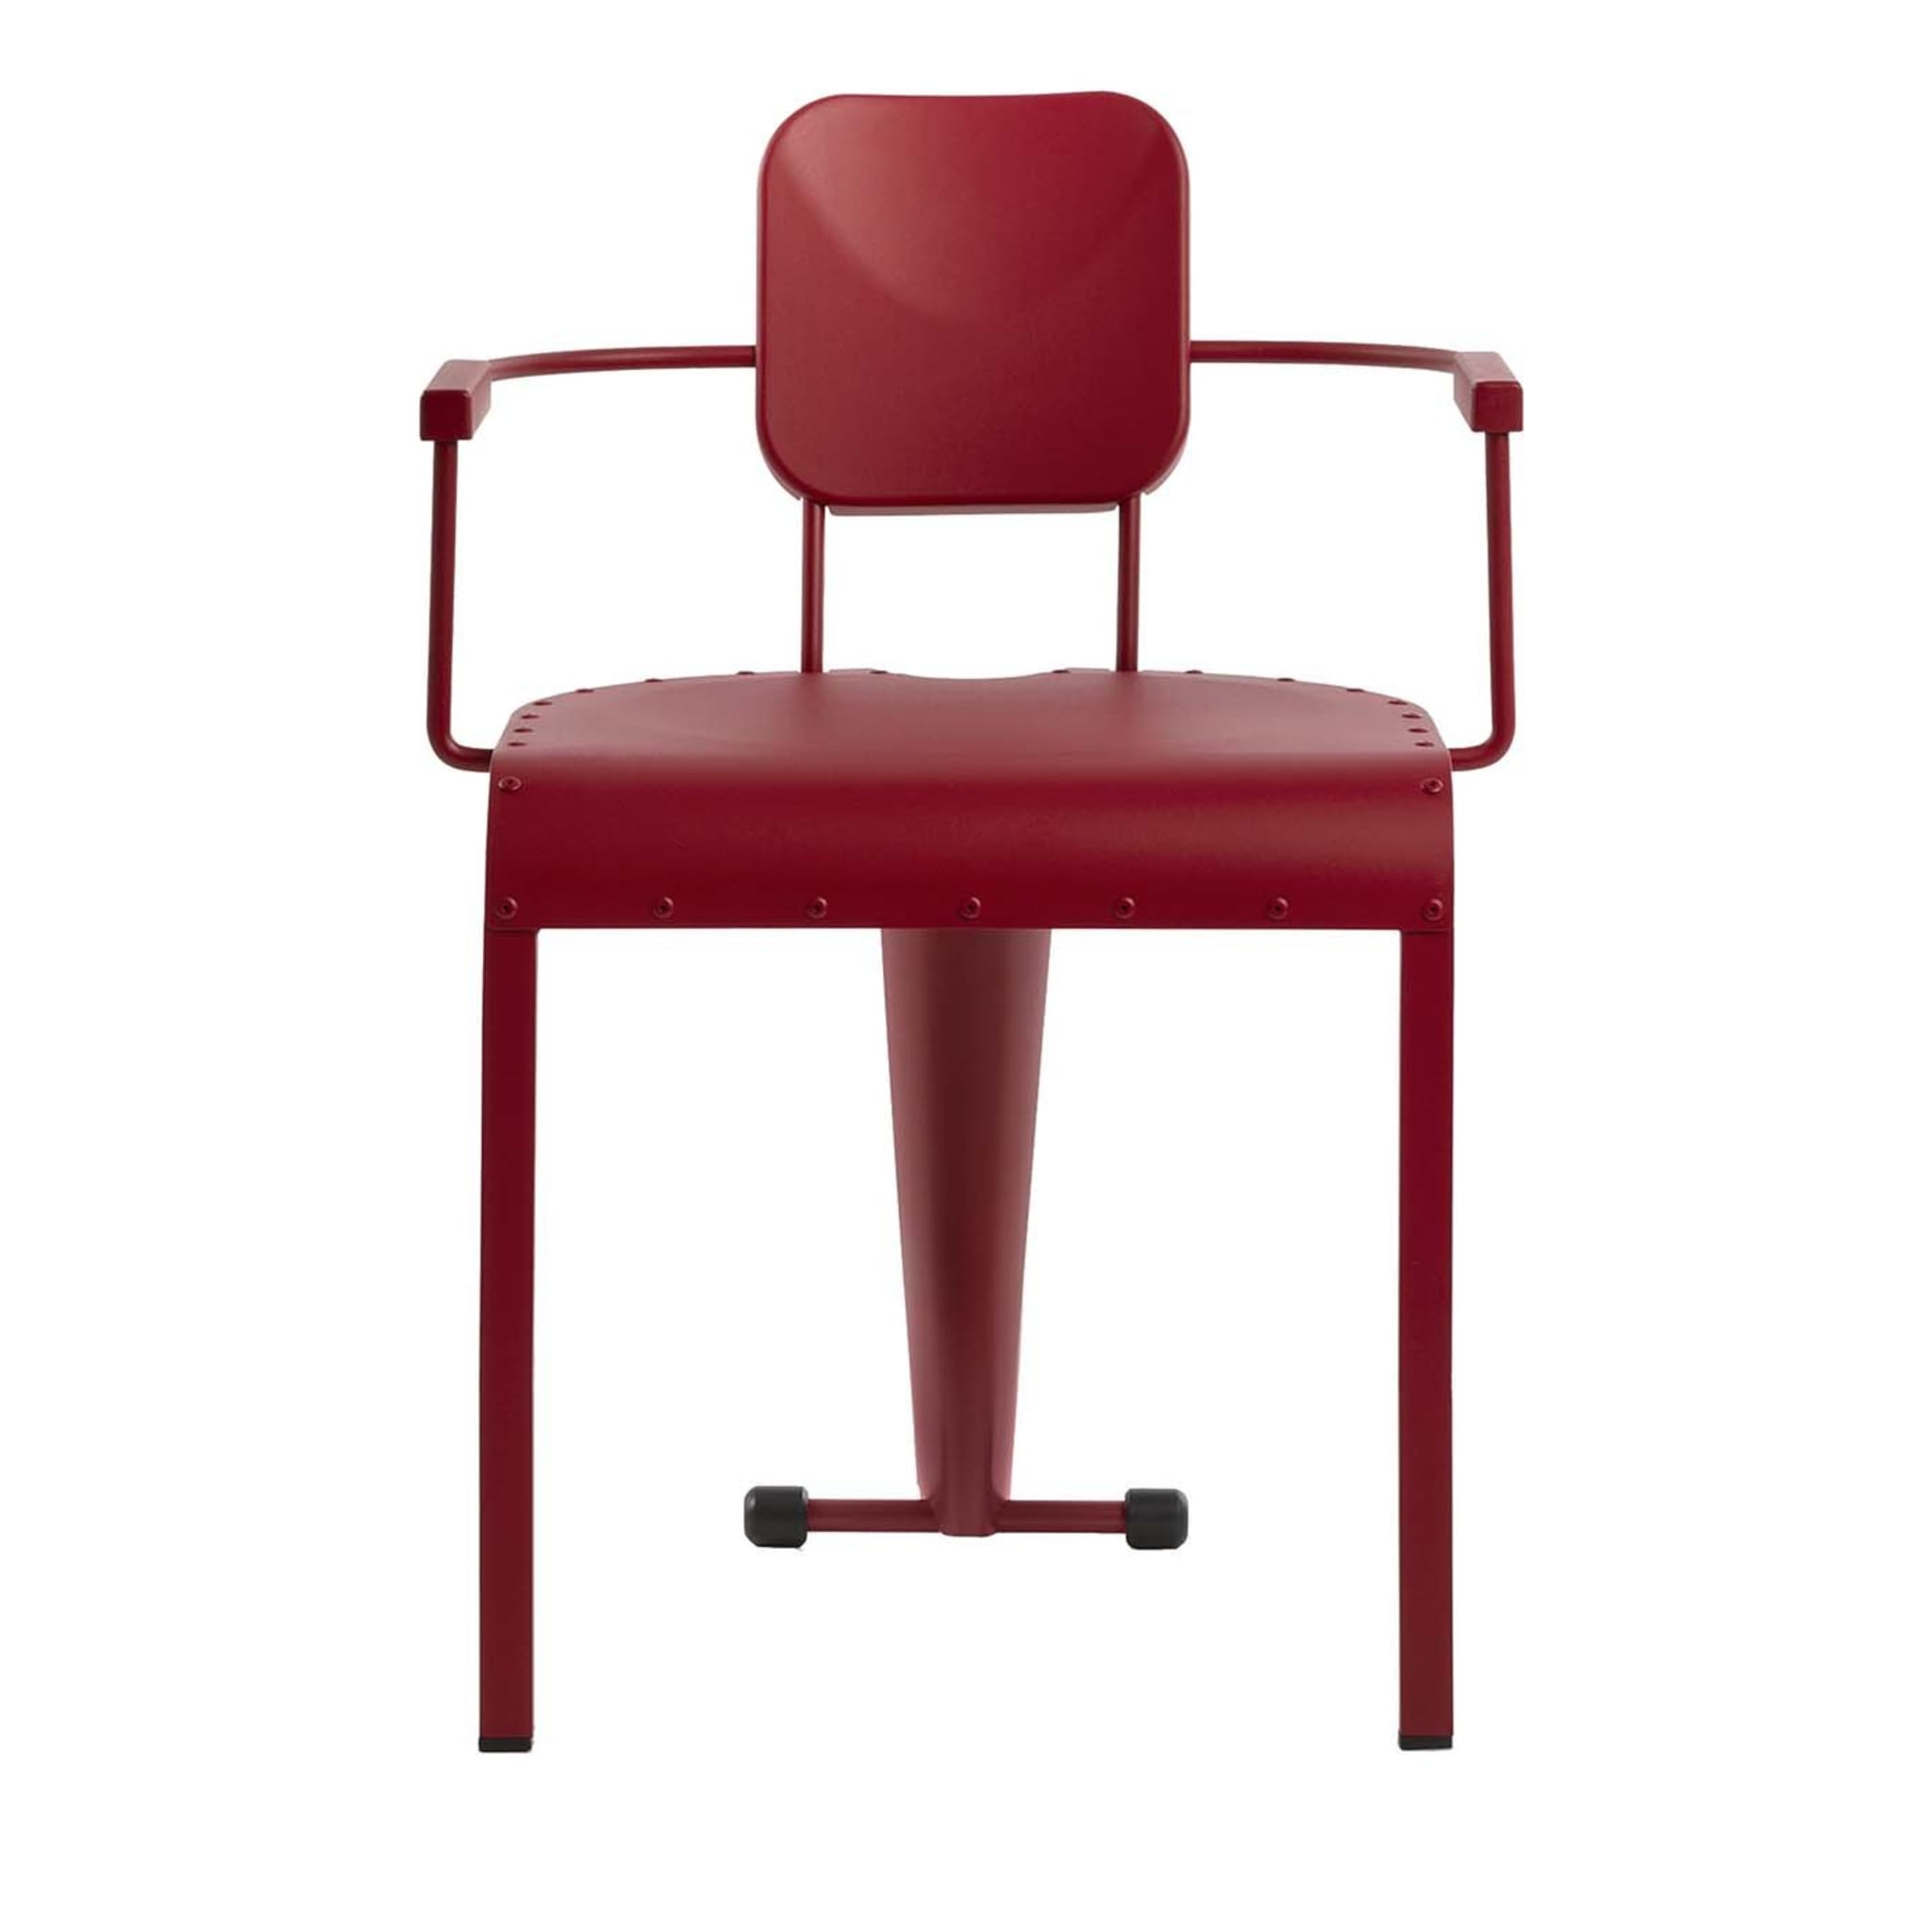 Rock Red Chair by Marc Sadler - Main view